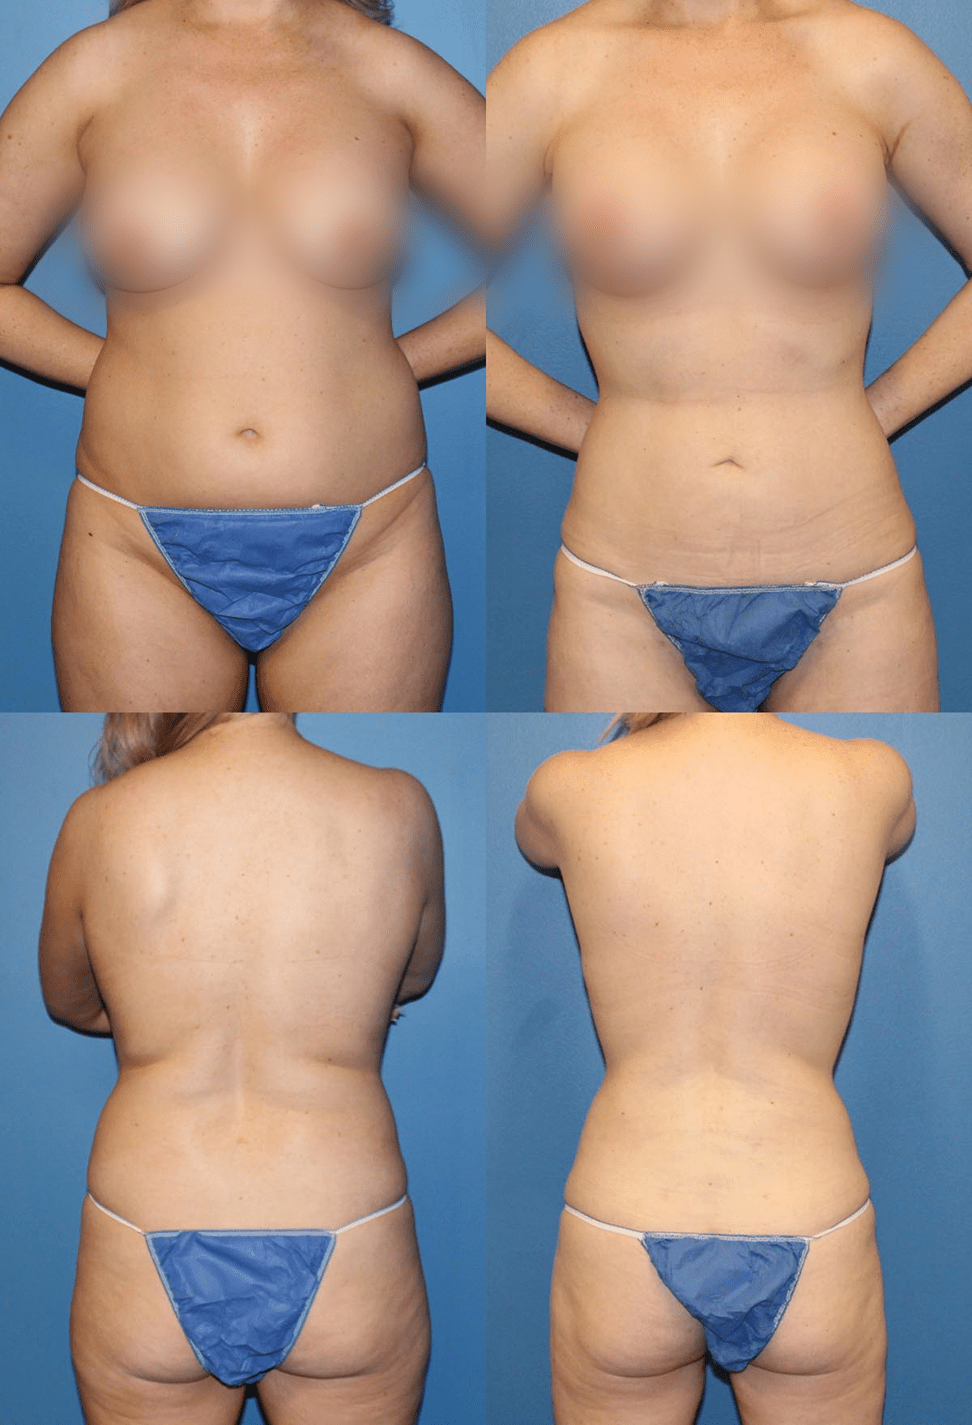 Before and After Liposuction Azani